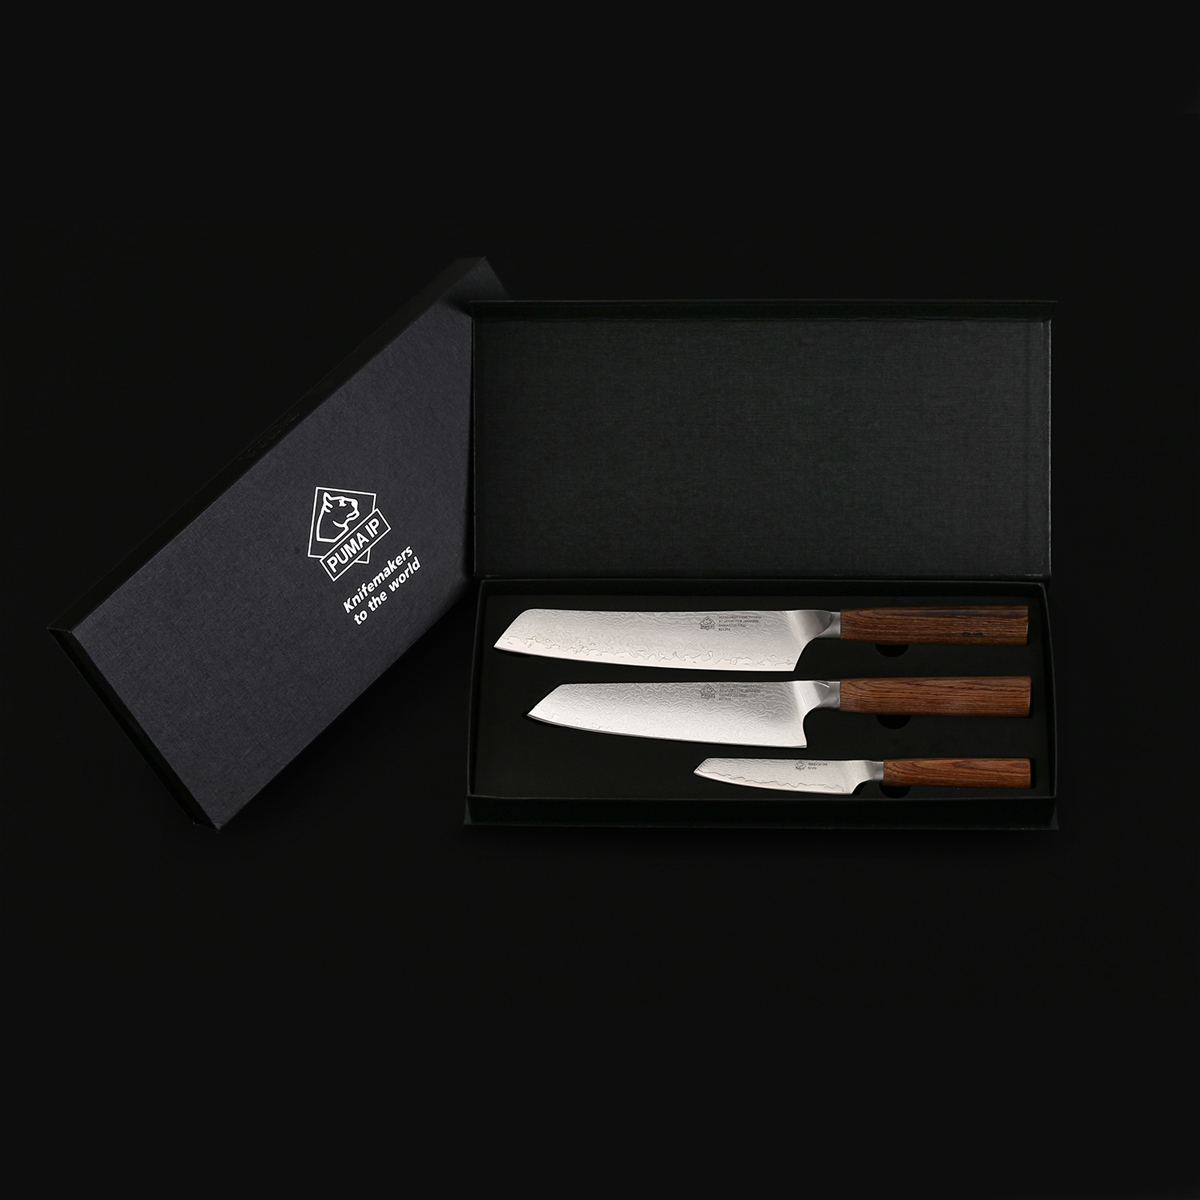 Puma IP Damascus 3 Piece Kitchen Set: Includes Chef, Santoku and Pairing Knives - Special Order Please Allow 24+ Weeks for Delivery